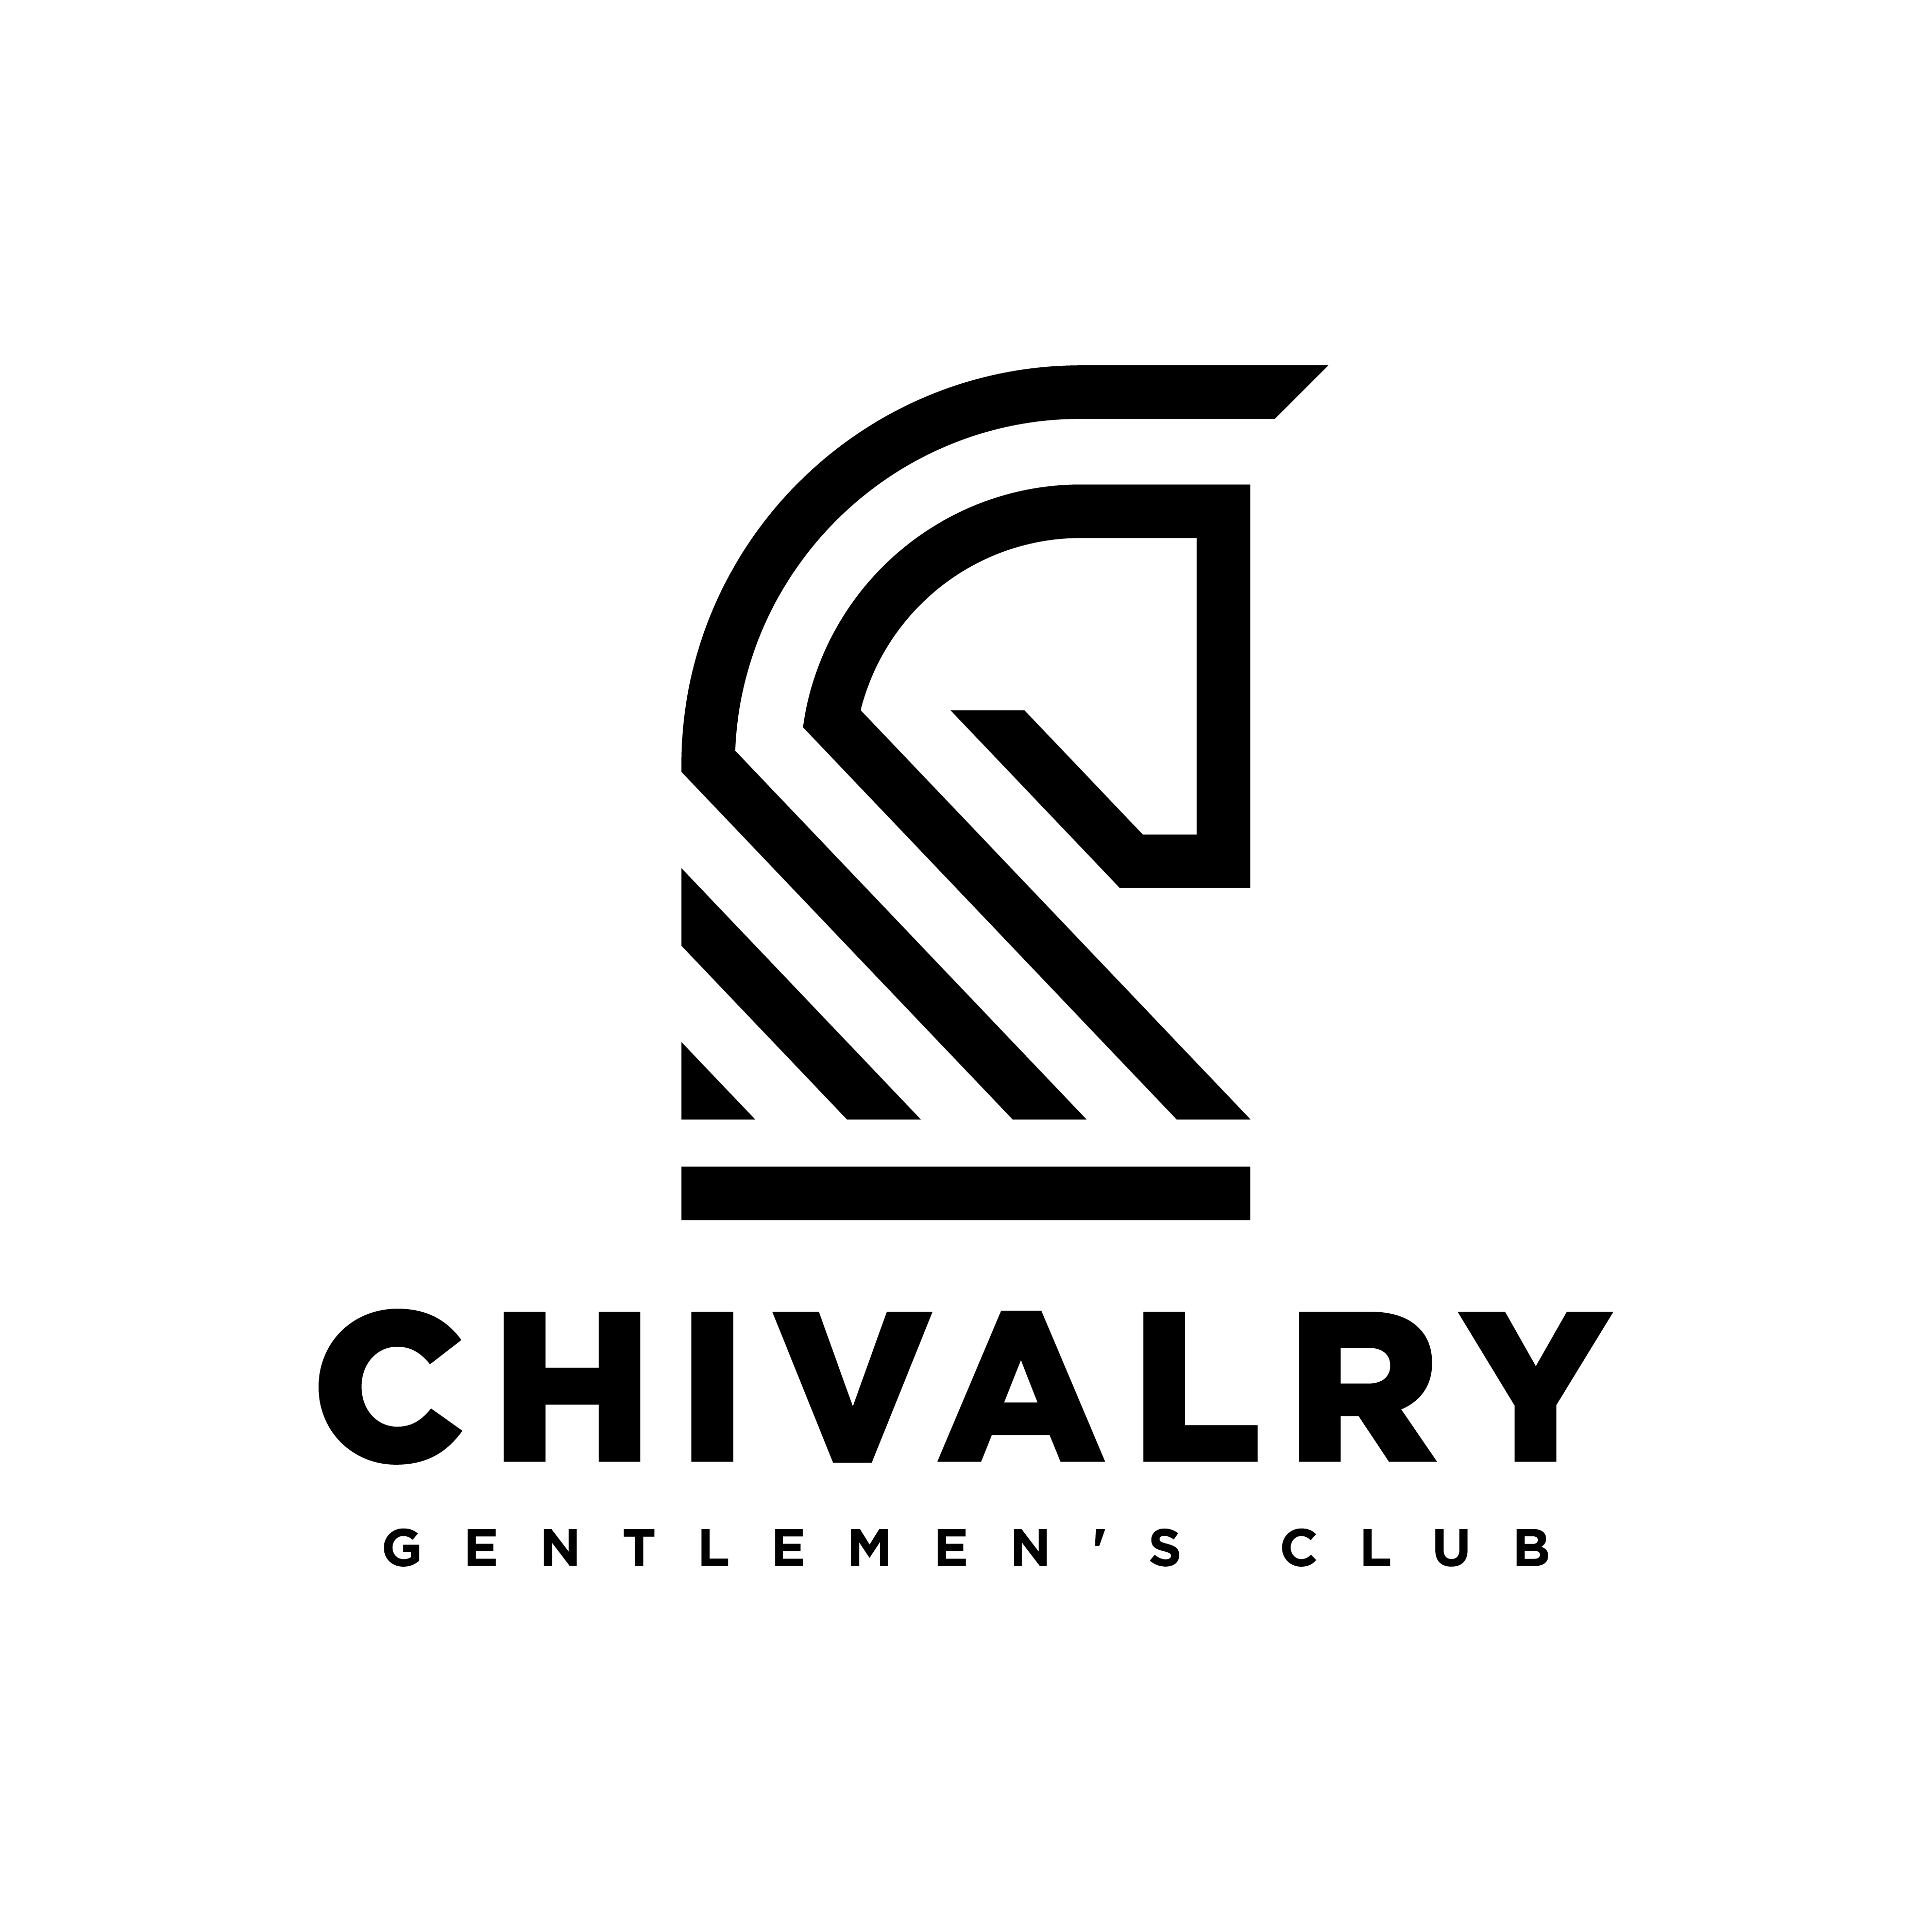 CHIVALRY logo design by logo designer Radu Moraru for your inspiration and for the worlds largest logo competition